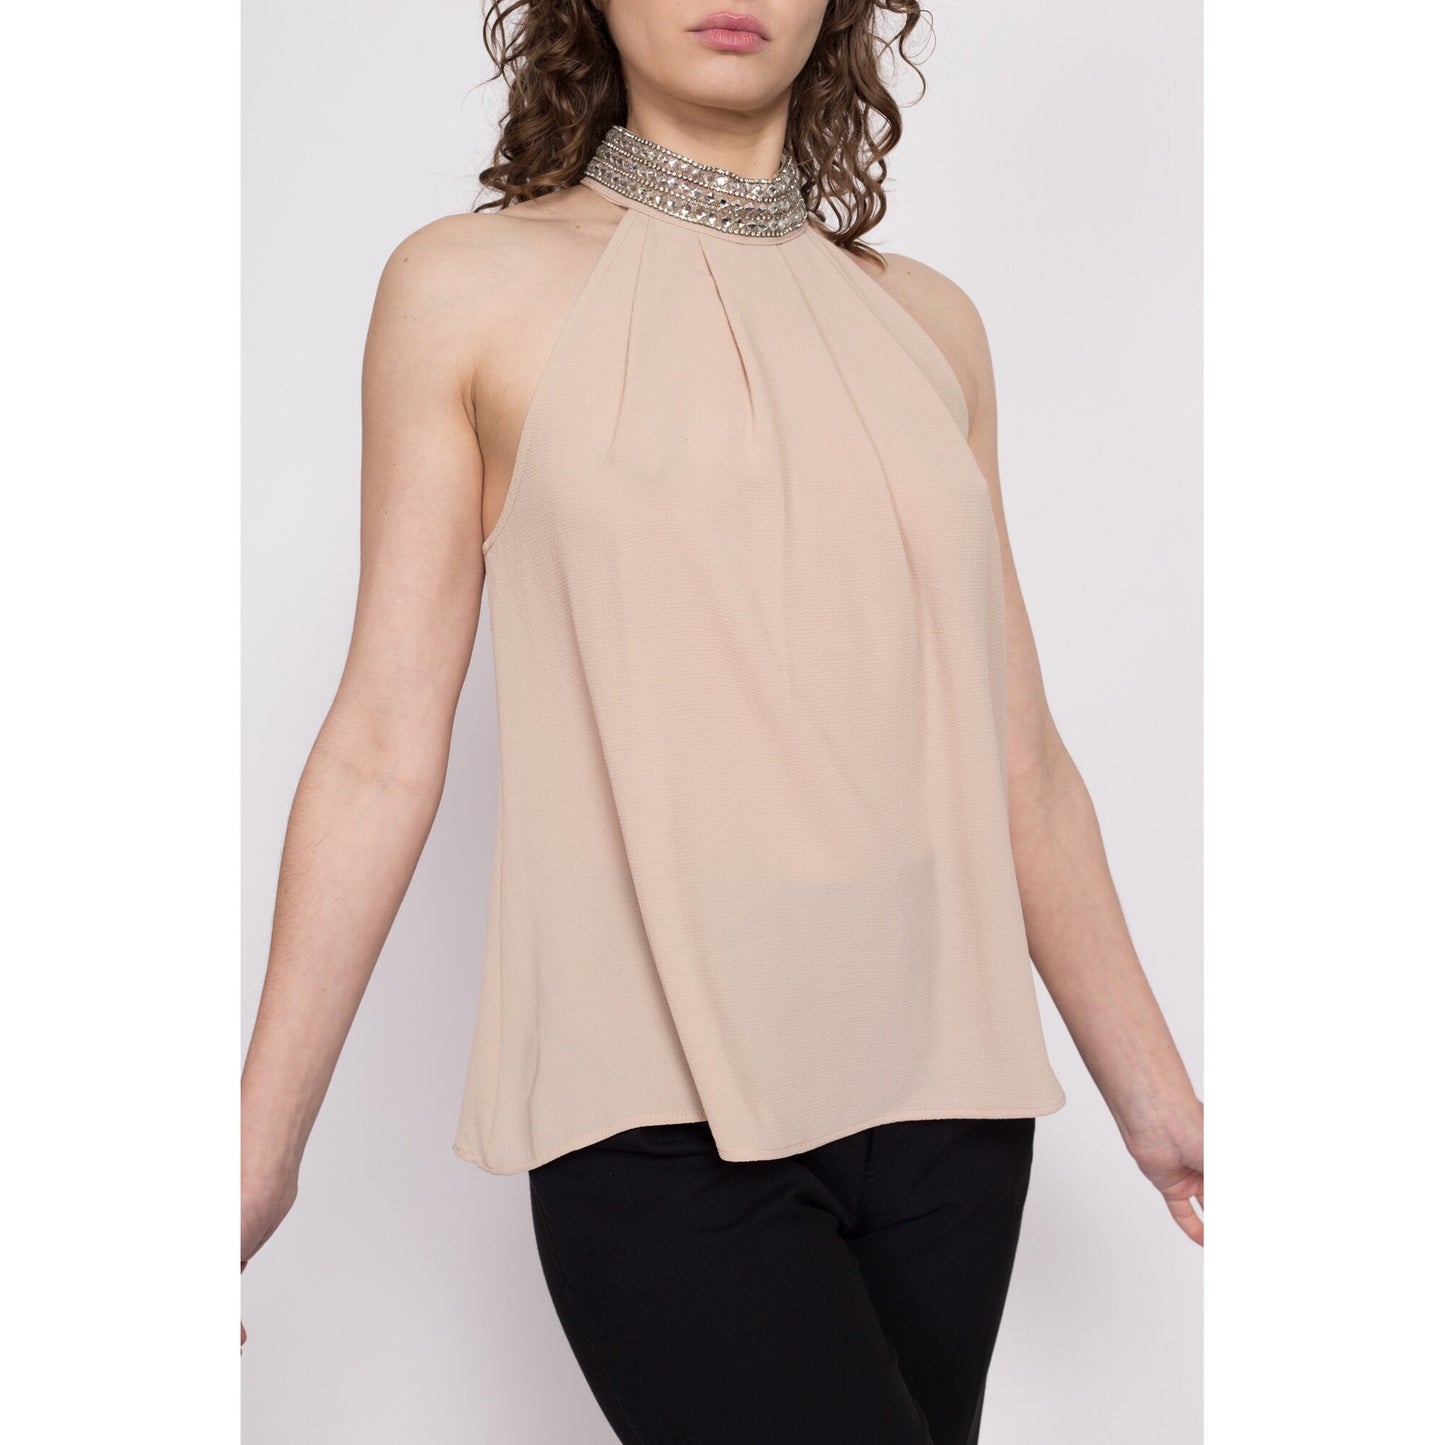 Y2K Nude Jeweled Neck Racerback Top - Small | Vintage Lightweight Flowy Sleeveless High Neck Shirt